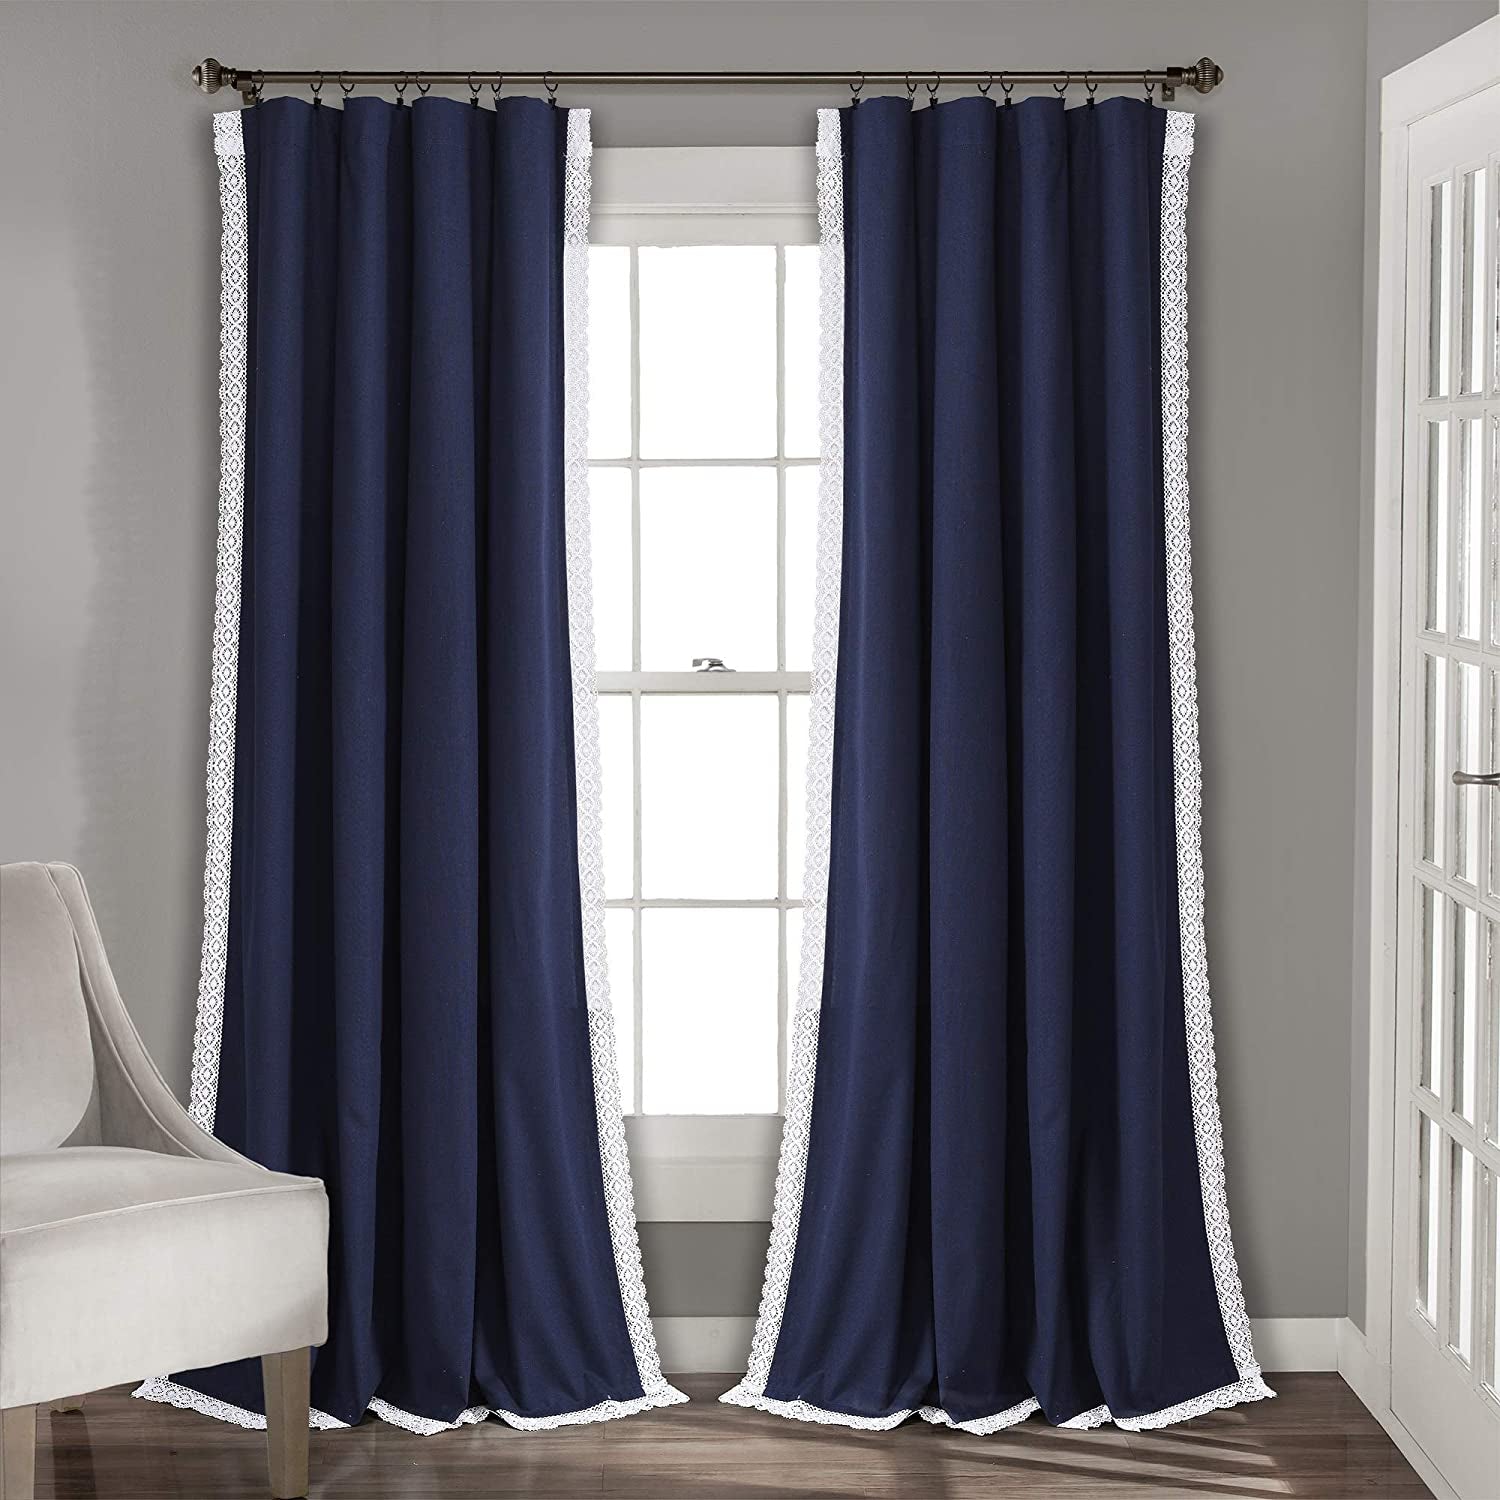 Rosalie Farmhouse Window Curtains Rustic Style Panel Set for Living, Dining Room Bedroom (Pair), 54"W X 120"L, Navy